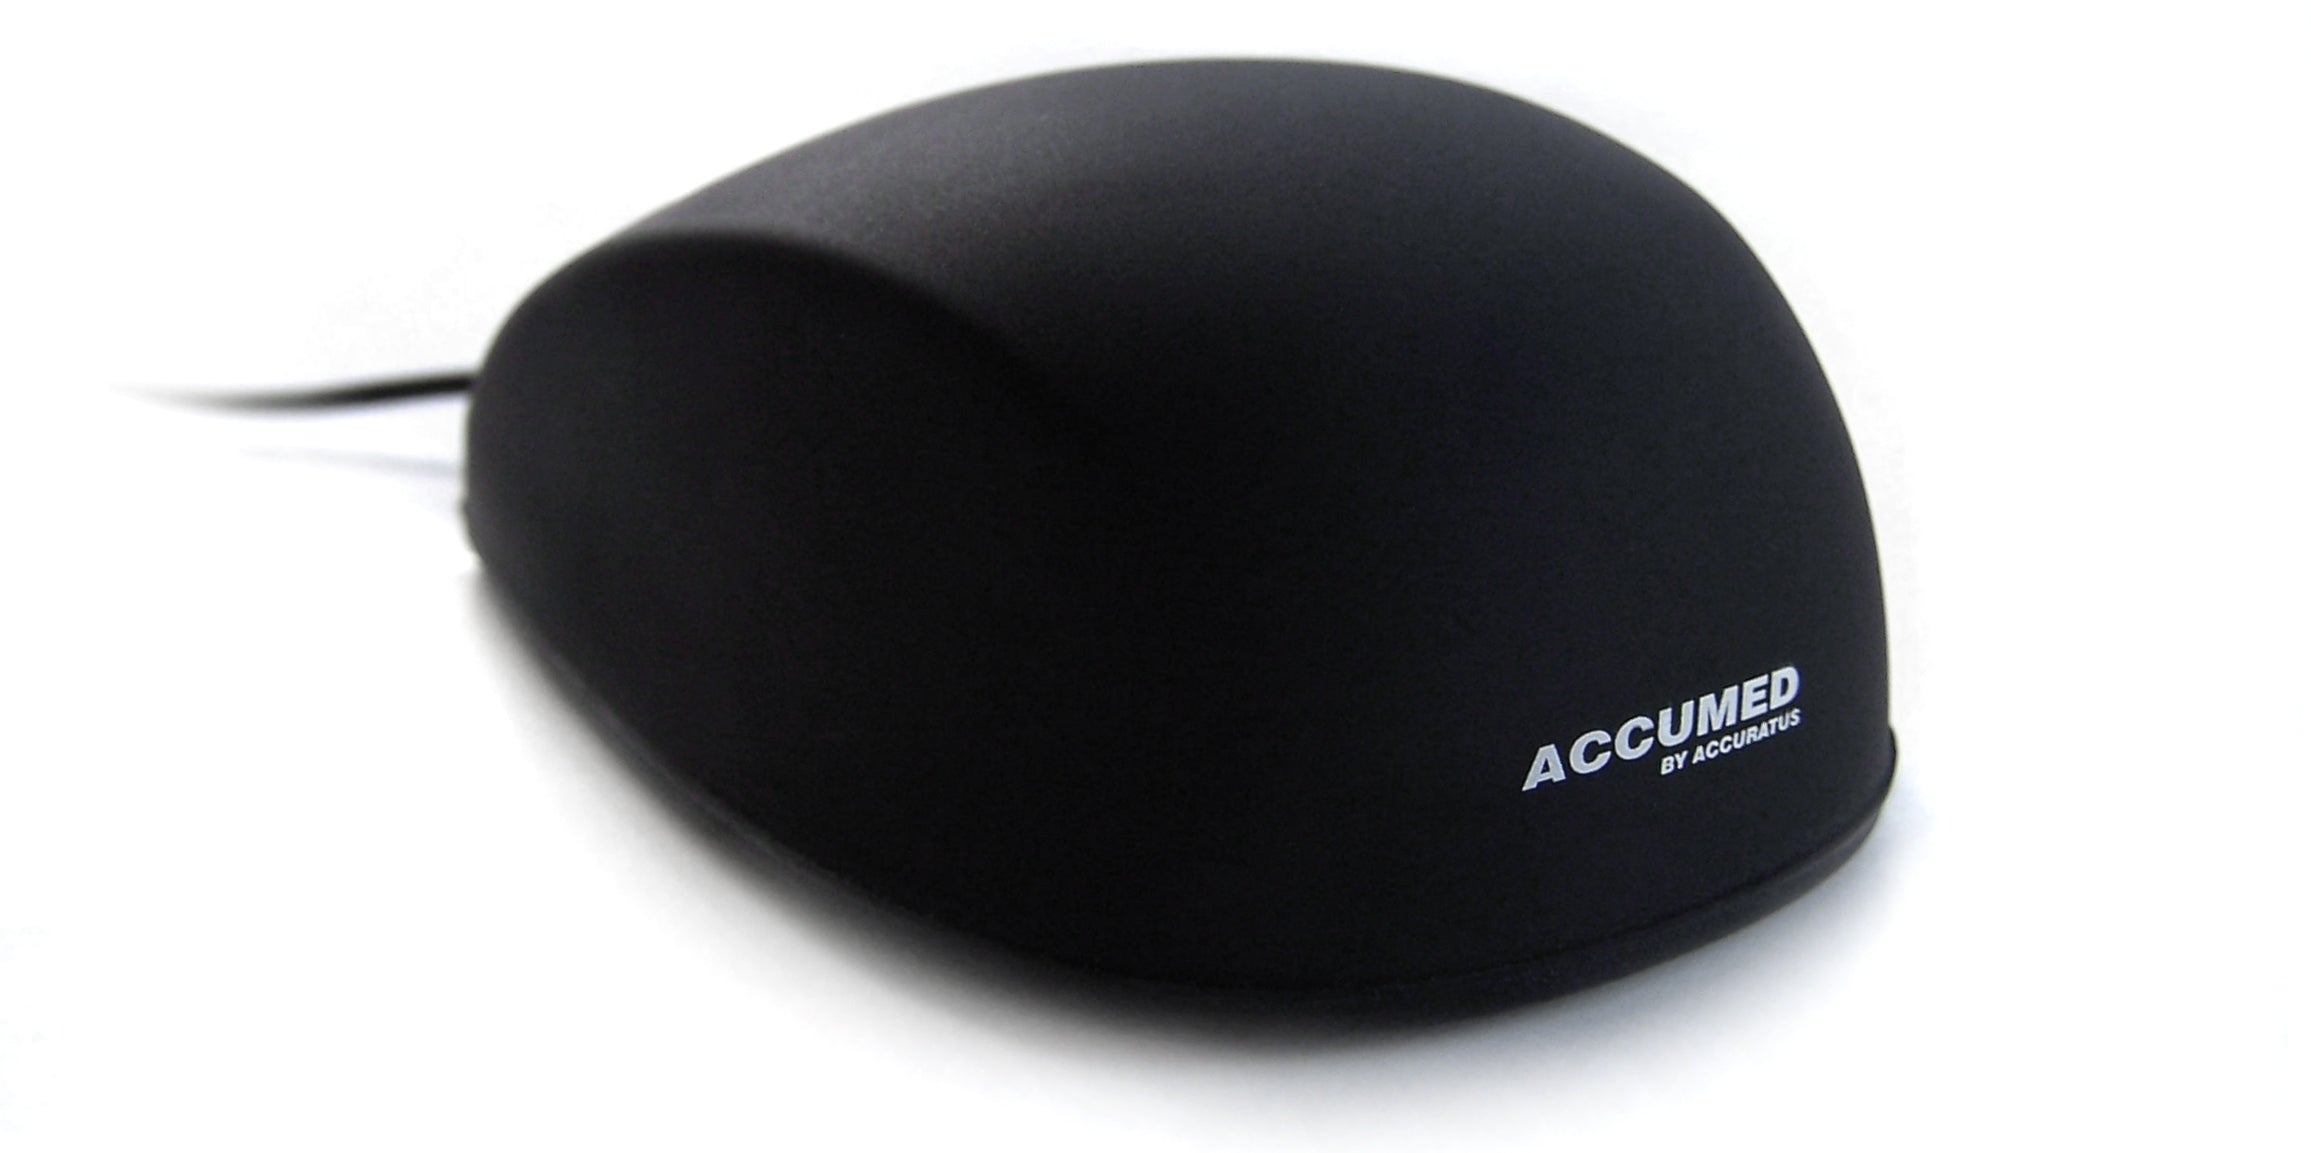 Accuratus AccuMed Mouse - USB & PS/2 Full Size Sealed IP67 Antibacterial Medical Mouse